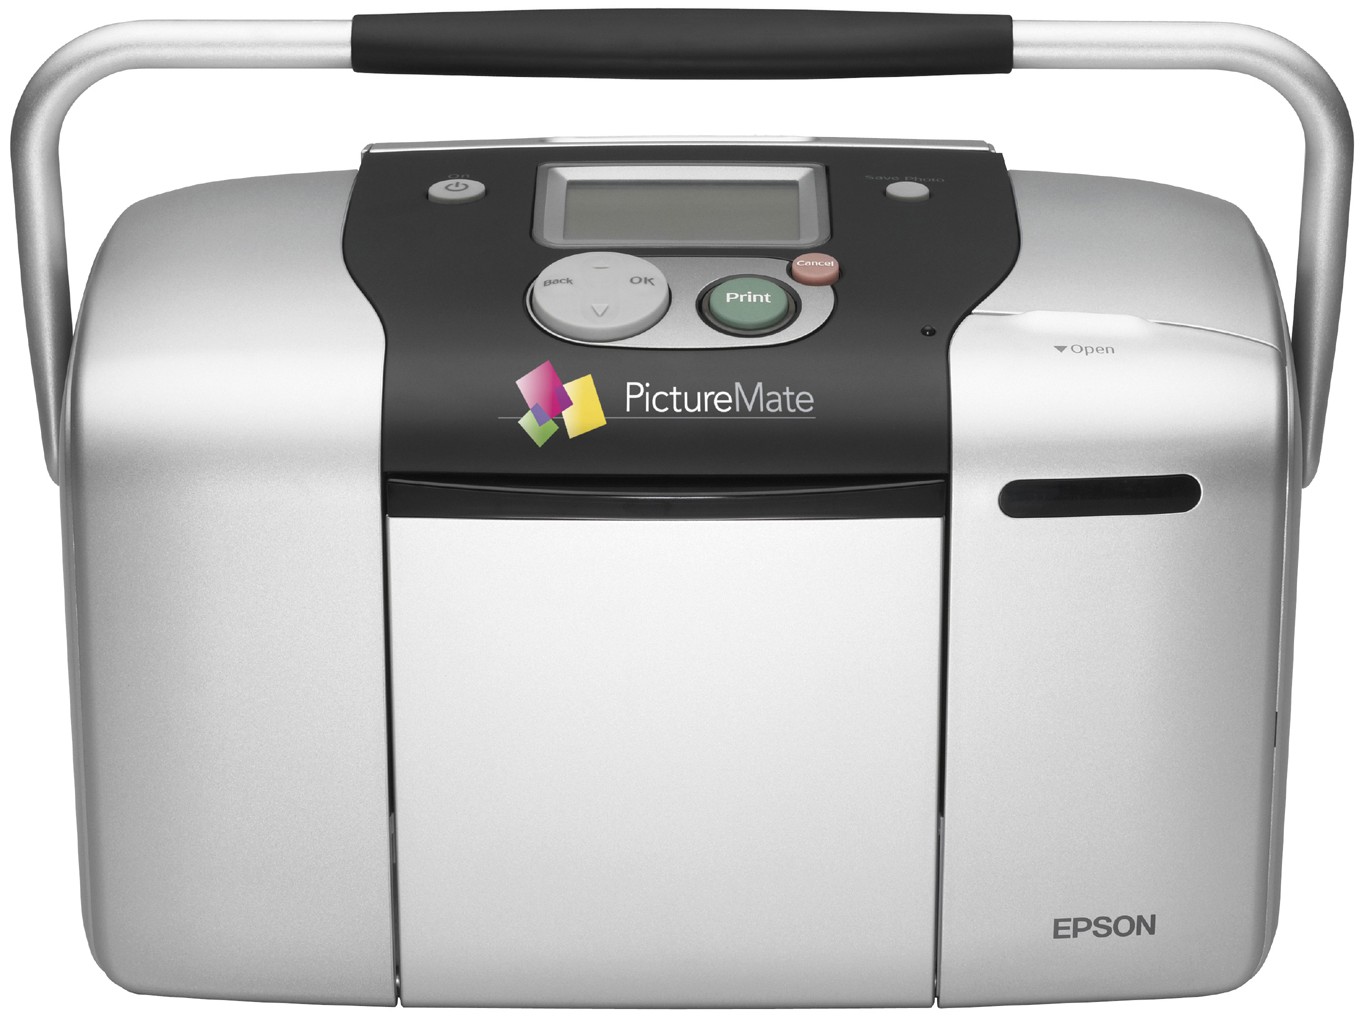 Step-by-step Driver Epson Printer Picturemate Installation in Ubuntu 22.04 - Featured